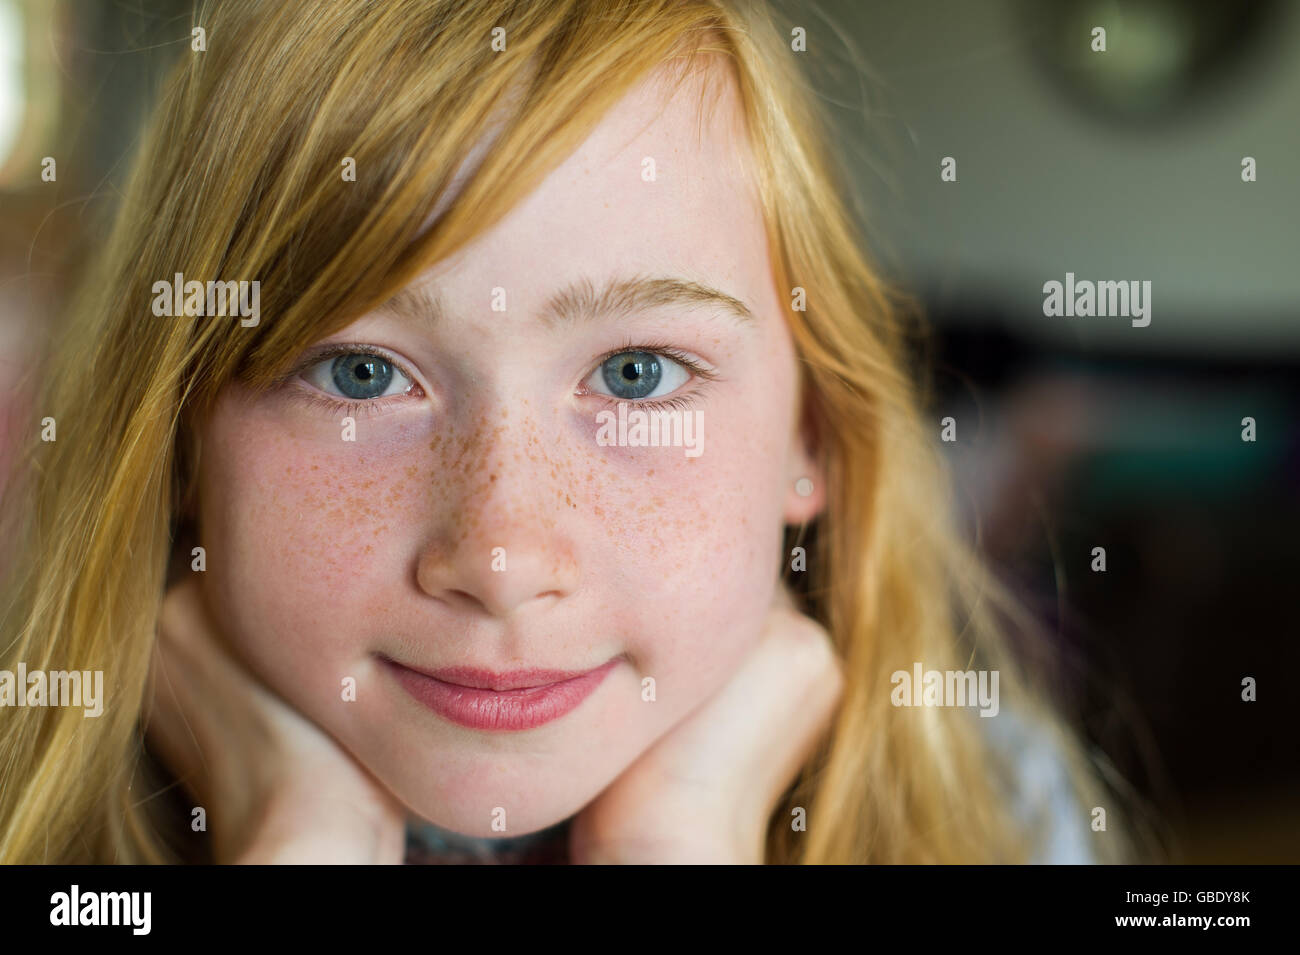 A portrait of a 9 year old girl looking into the camera. Stock Photo